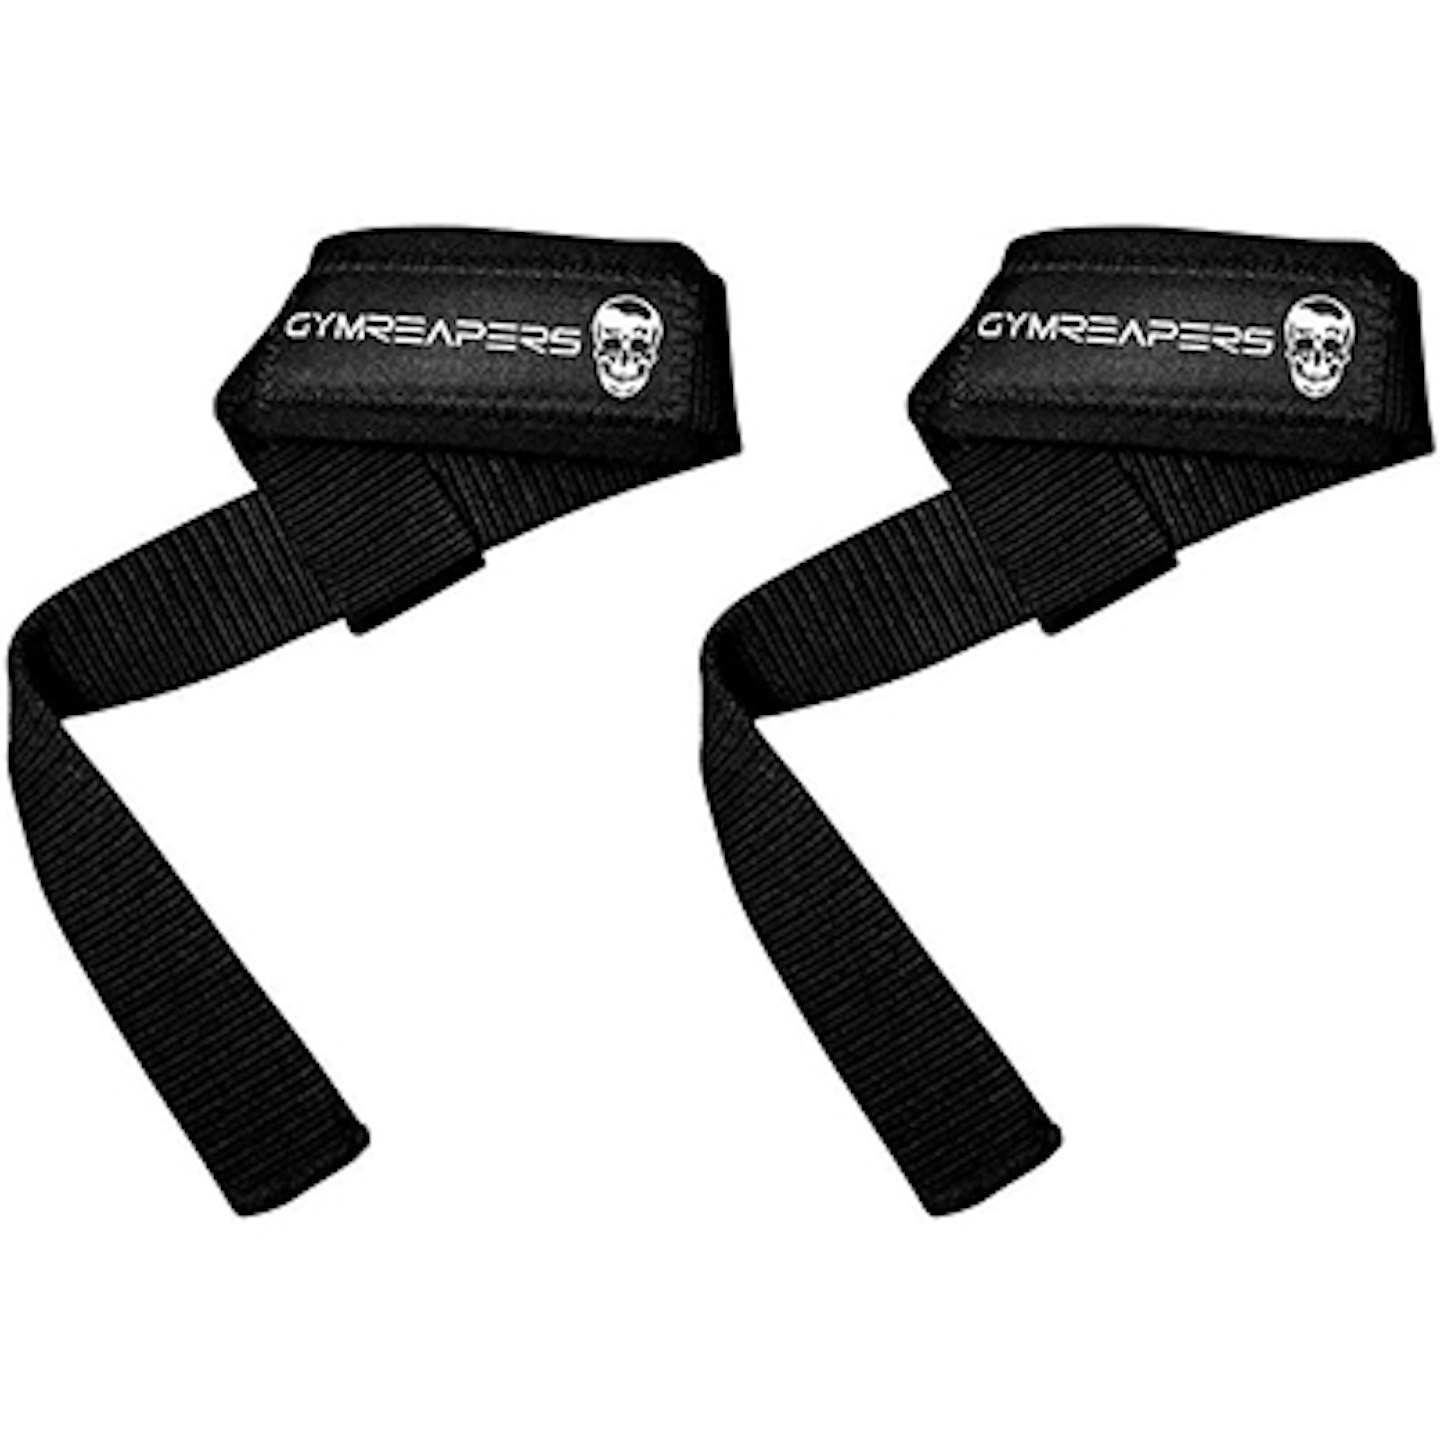 Gymreapers lifting straps